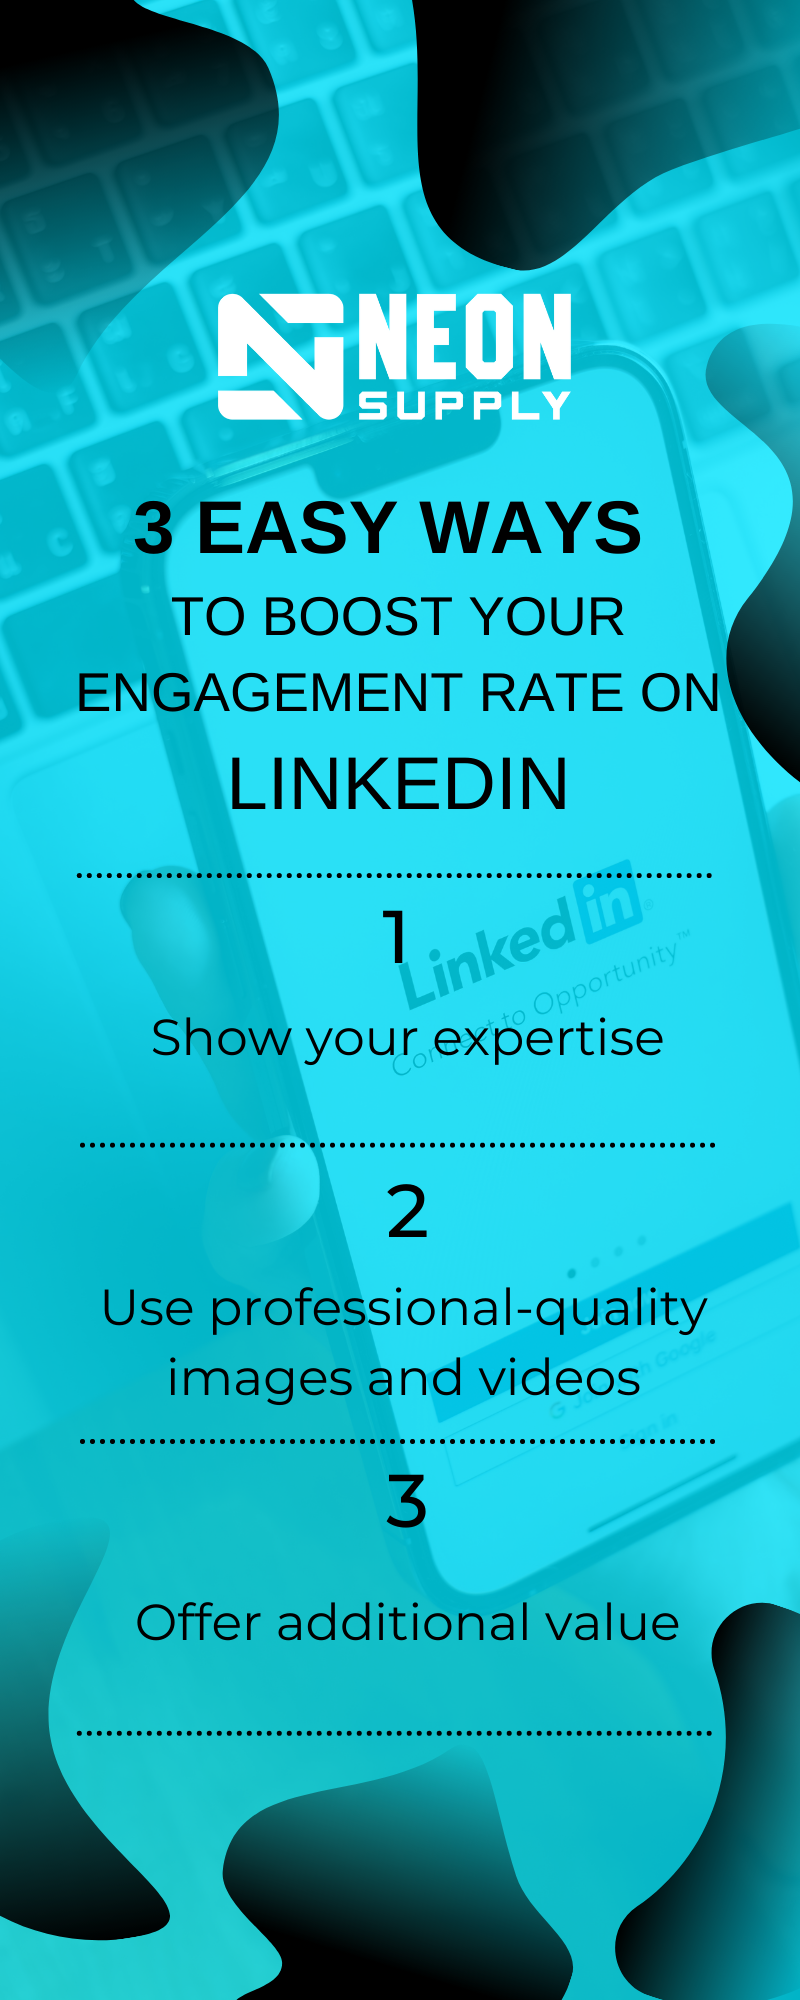 3 EASY WAYS TO BOOST YOUR ENGAGEMENT RATE ON LINKEDIN